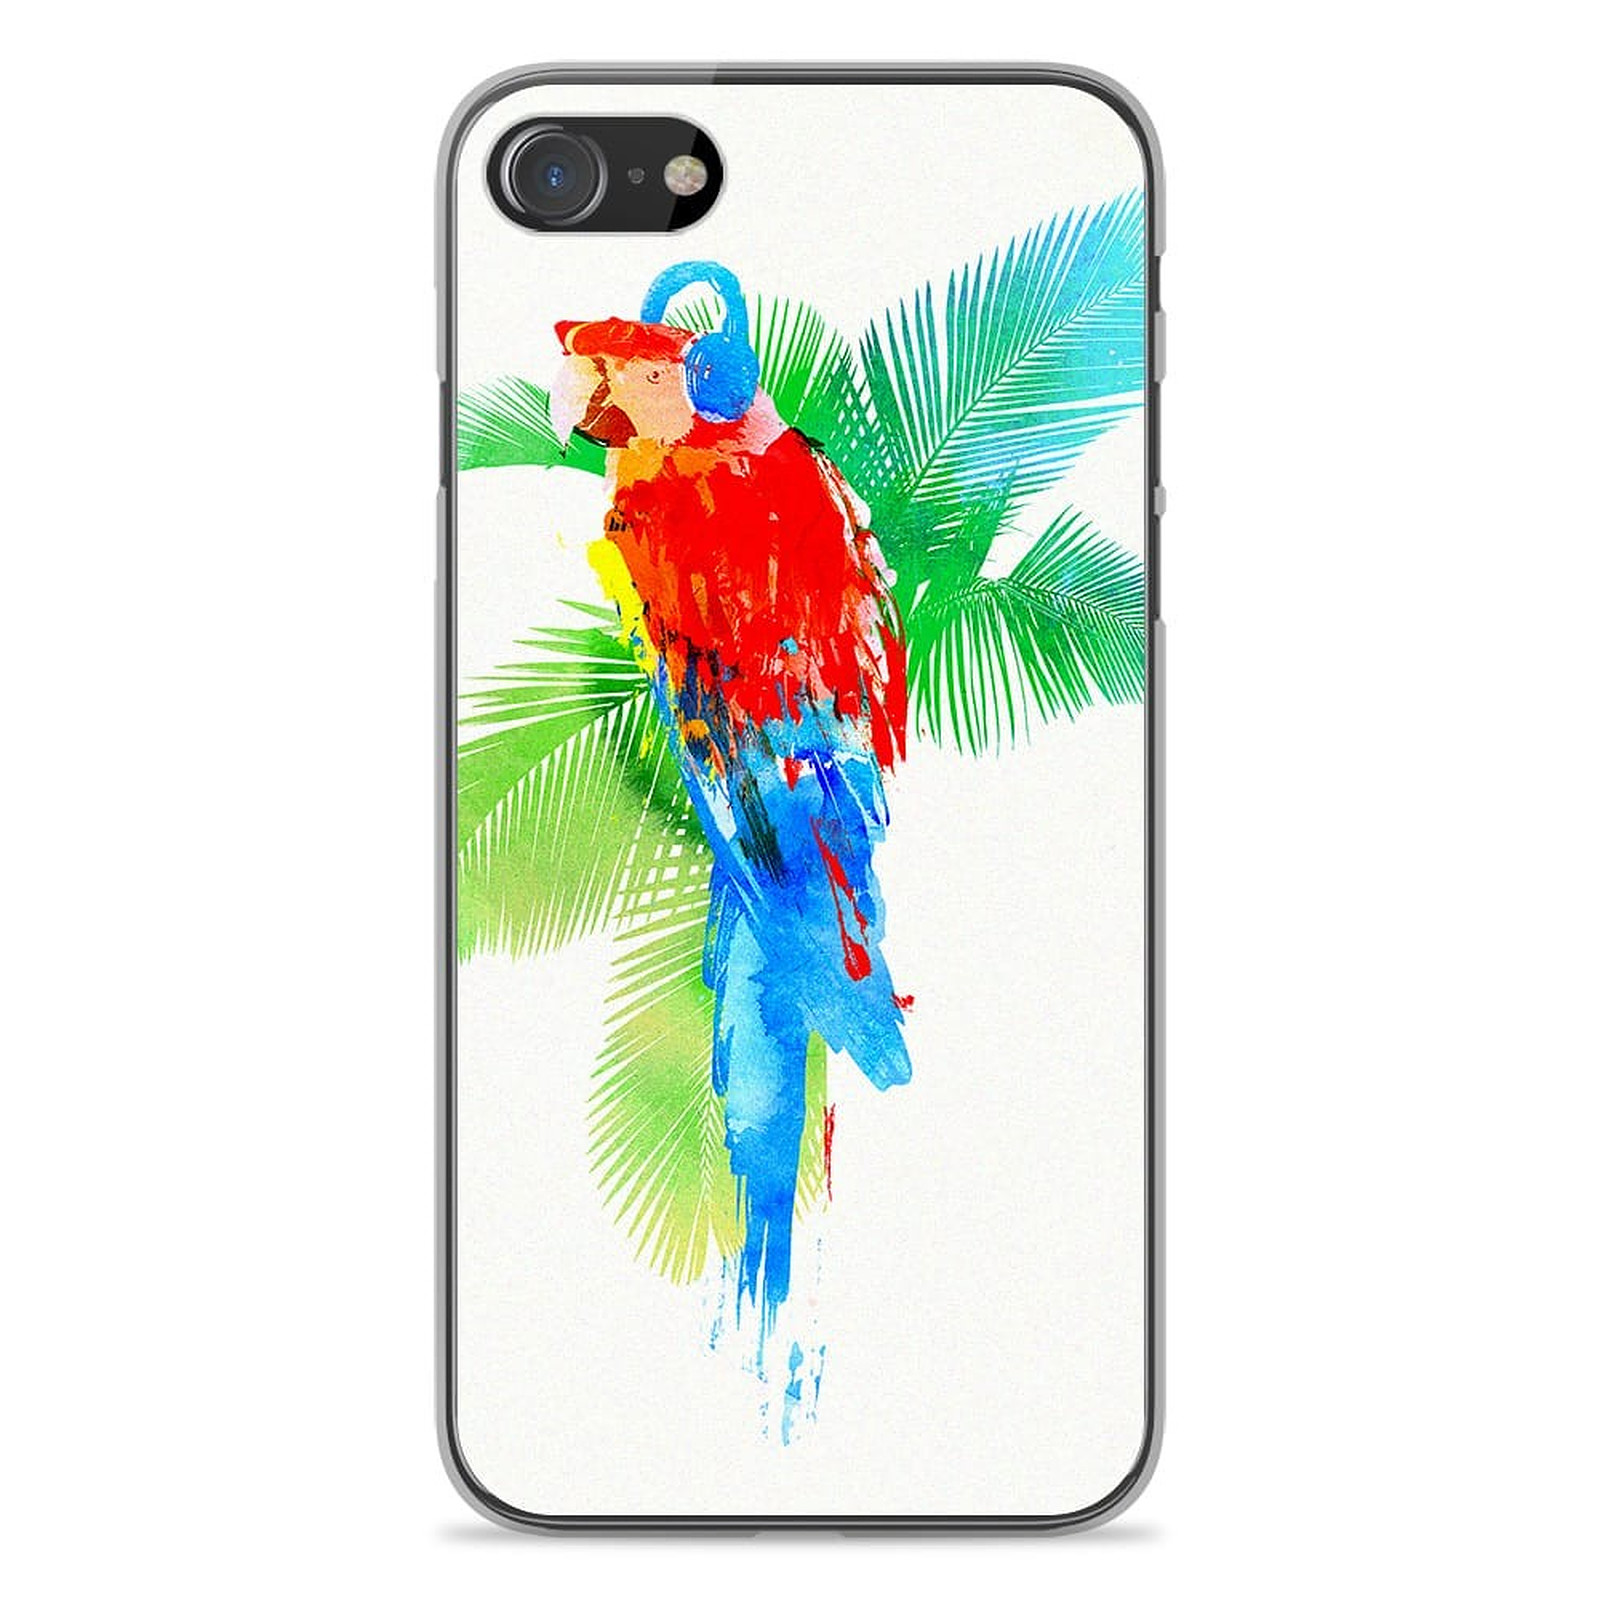 1001 Coques Coque silicone gel Apple iPhone SE 2020 motif RF Tropical party - Coque telephone 1001Coques